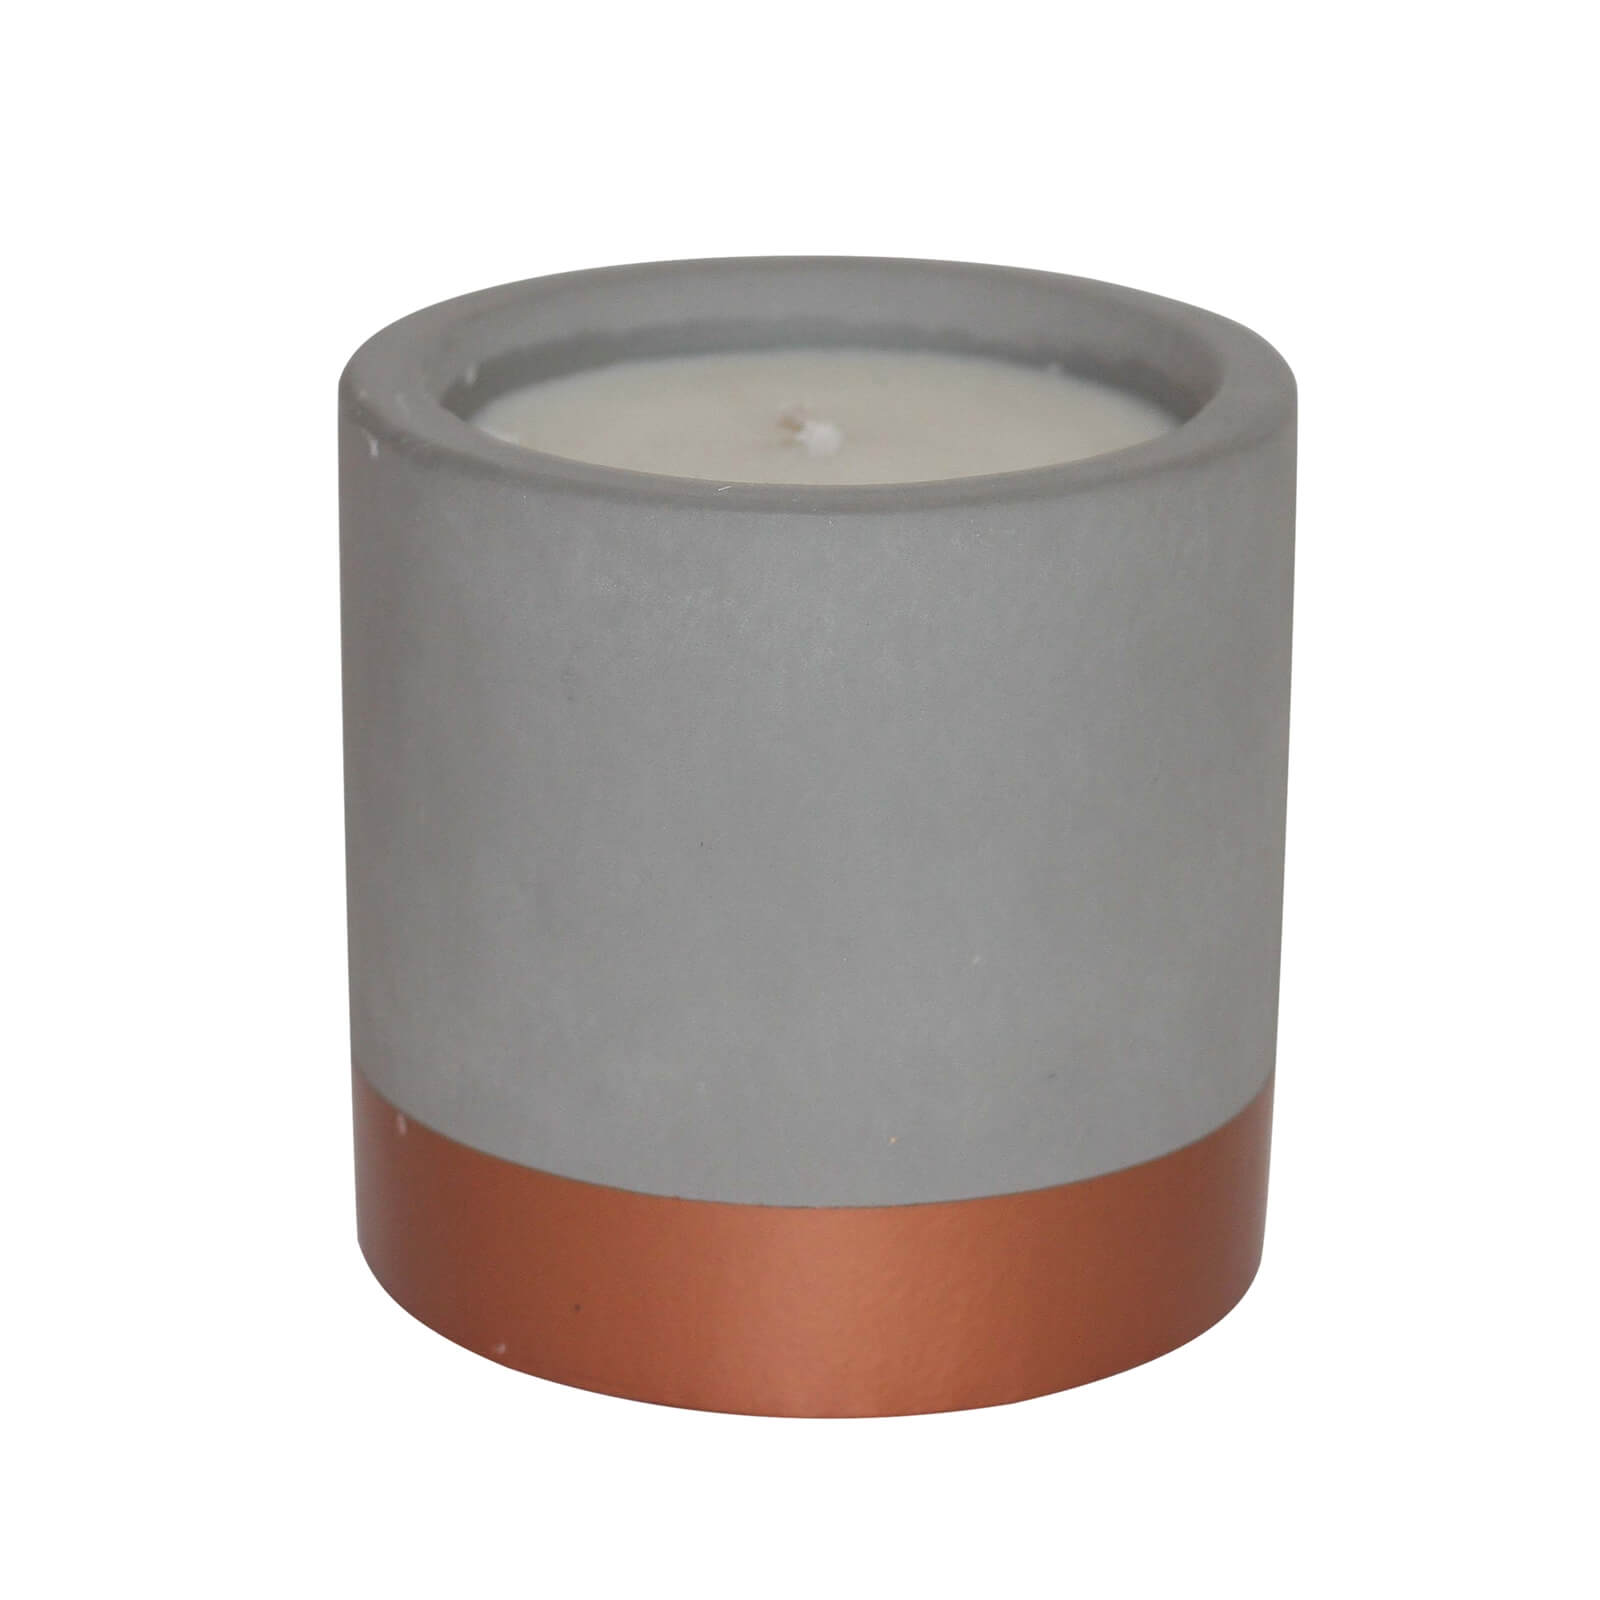 Citronella Candle With Bronze Finish